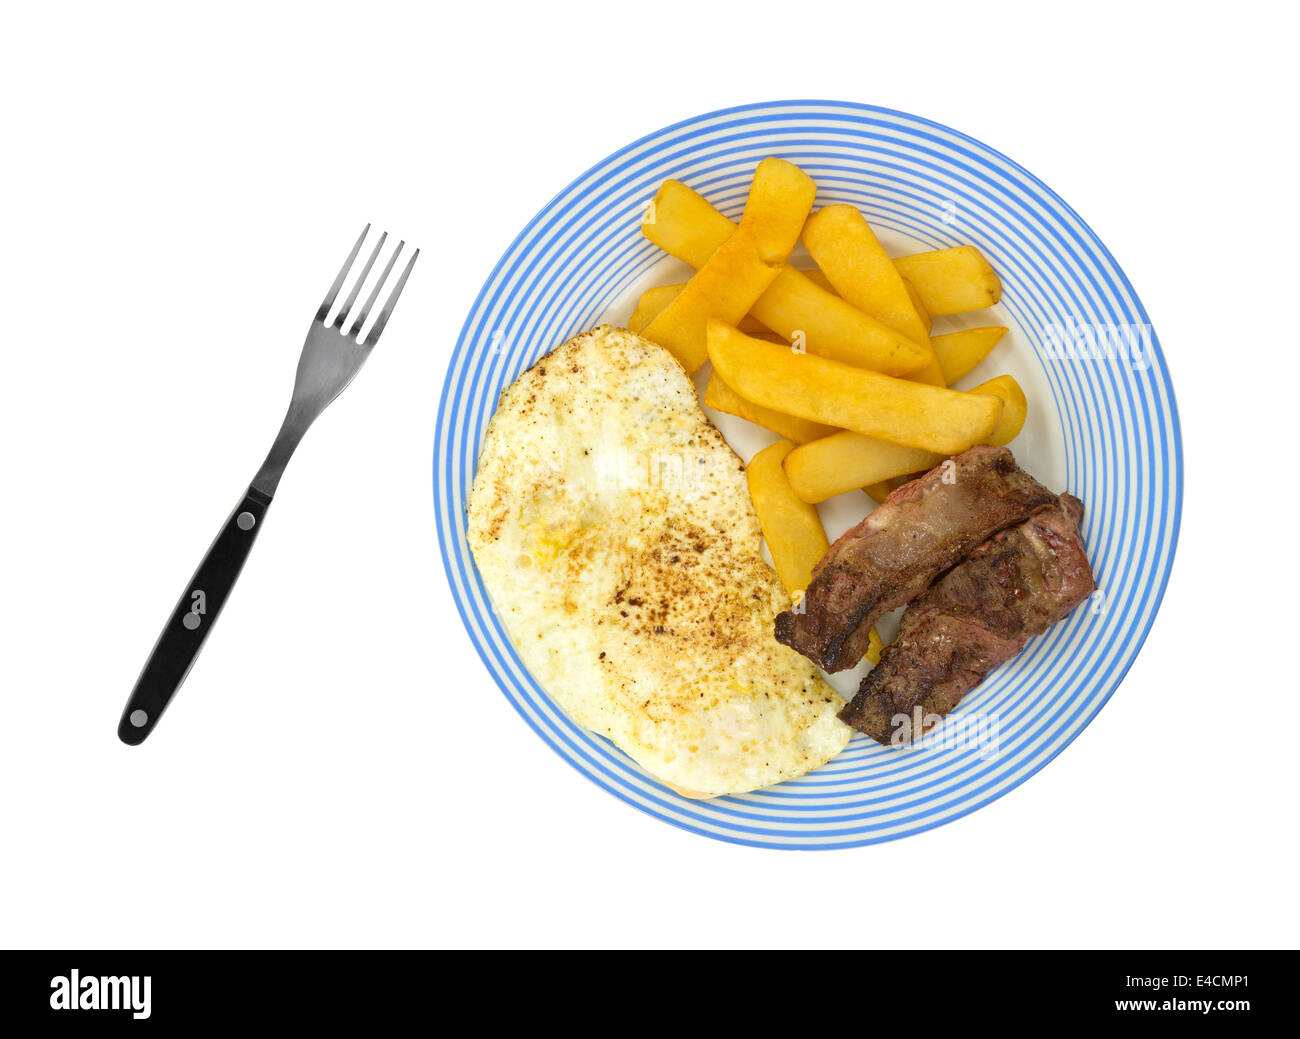 A hearty breakfast of strip steak, potatoes and eggs on a blue striped plate with black handled fork to the side. Stock Photo